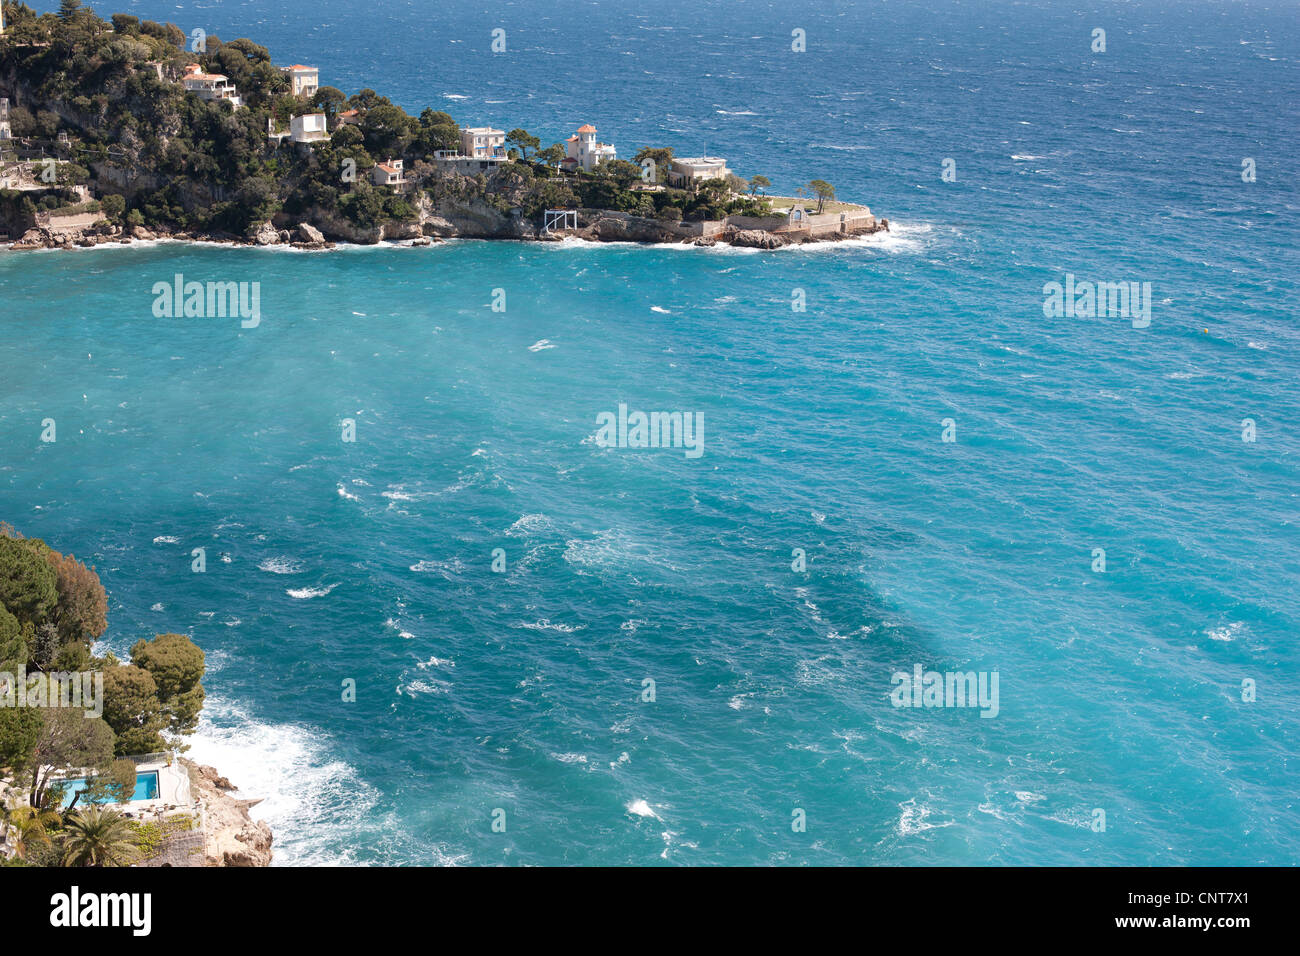 Rocky promontory with luxurious villas on the azure mediterranean's coastline. Cap Mala, Cap d'Ail, French Riviera, France. Stock Photo